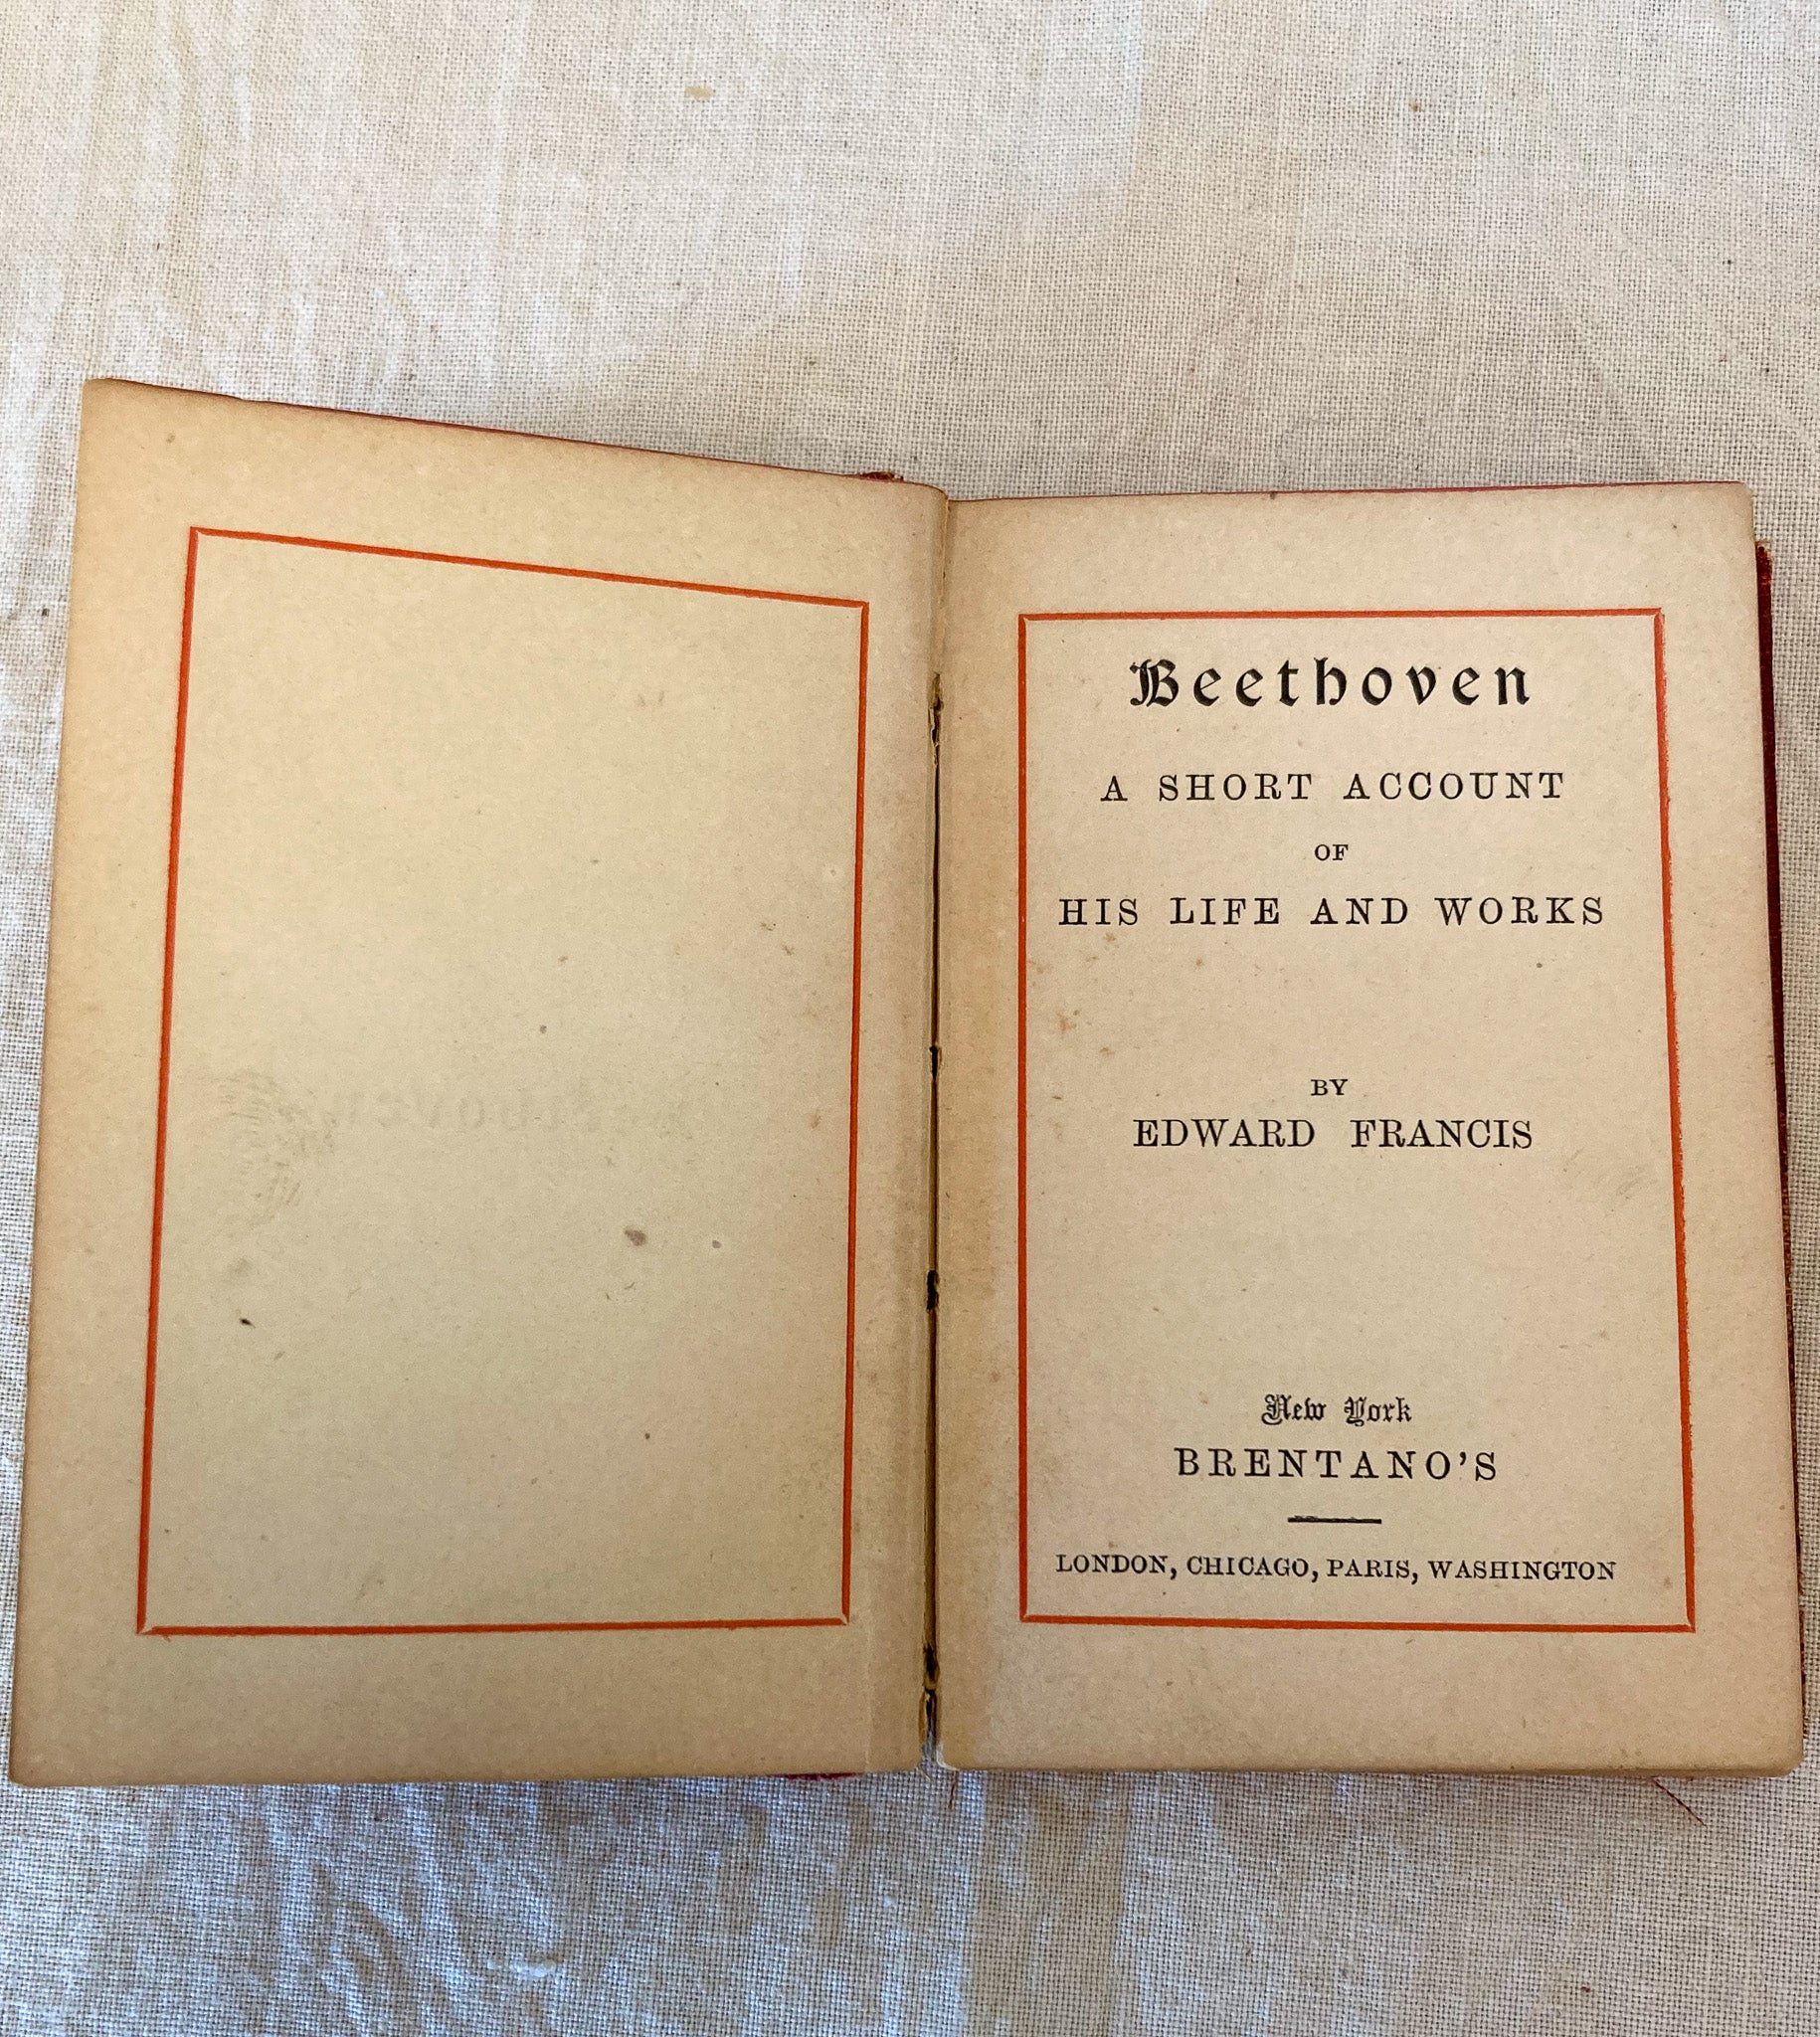 Books and Glasses!  1800’s Wire Rimmed Glasses, Tiny Book “Life of Beethoven”, and 1845 Smith’s Geography Book